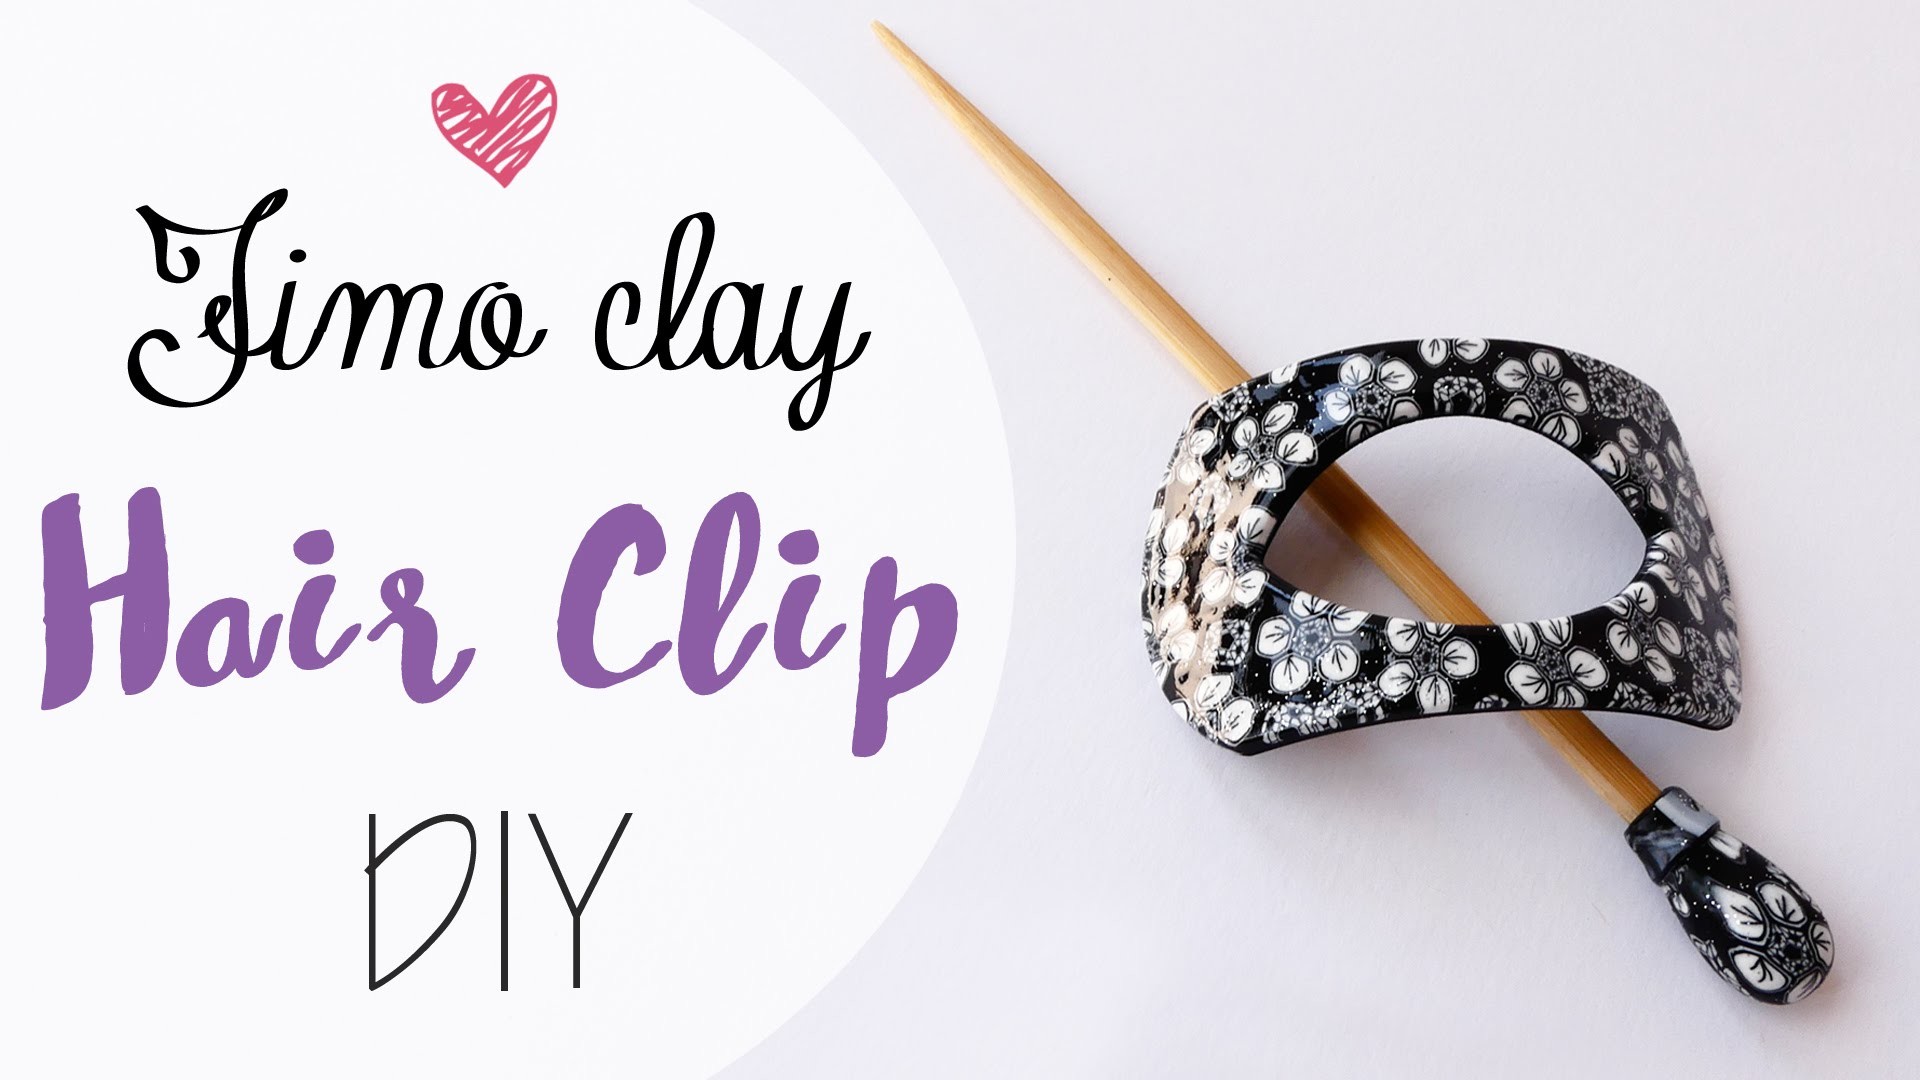 Tuto: Fermaglio capelli in Fimo - ENG SUBS Fimo clay hair clip DIY